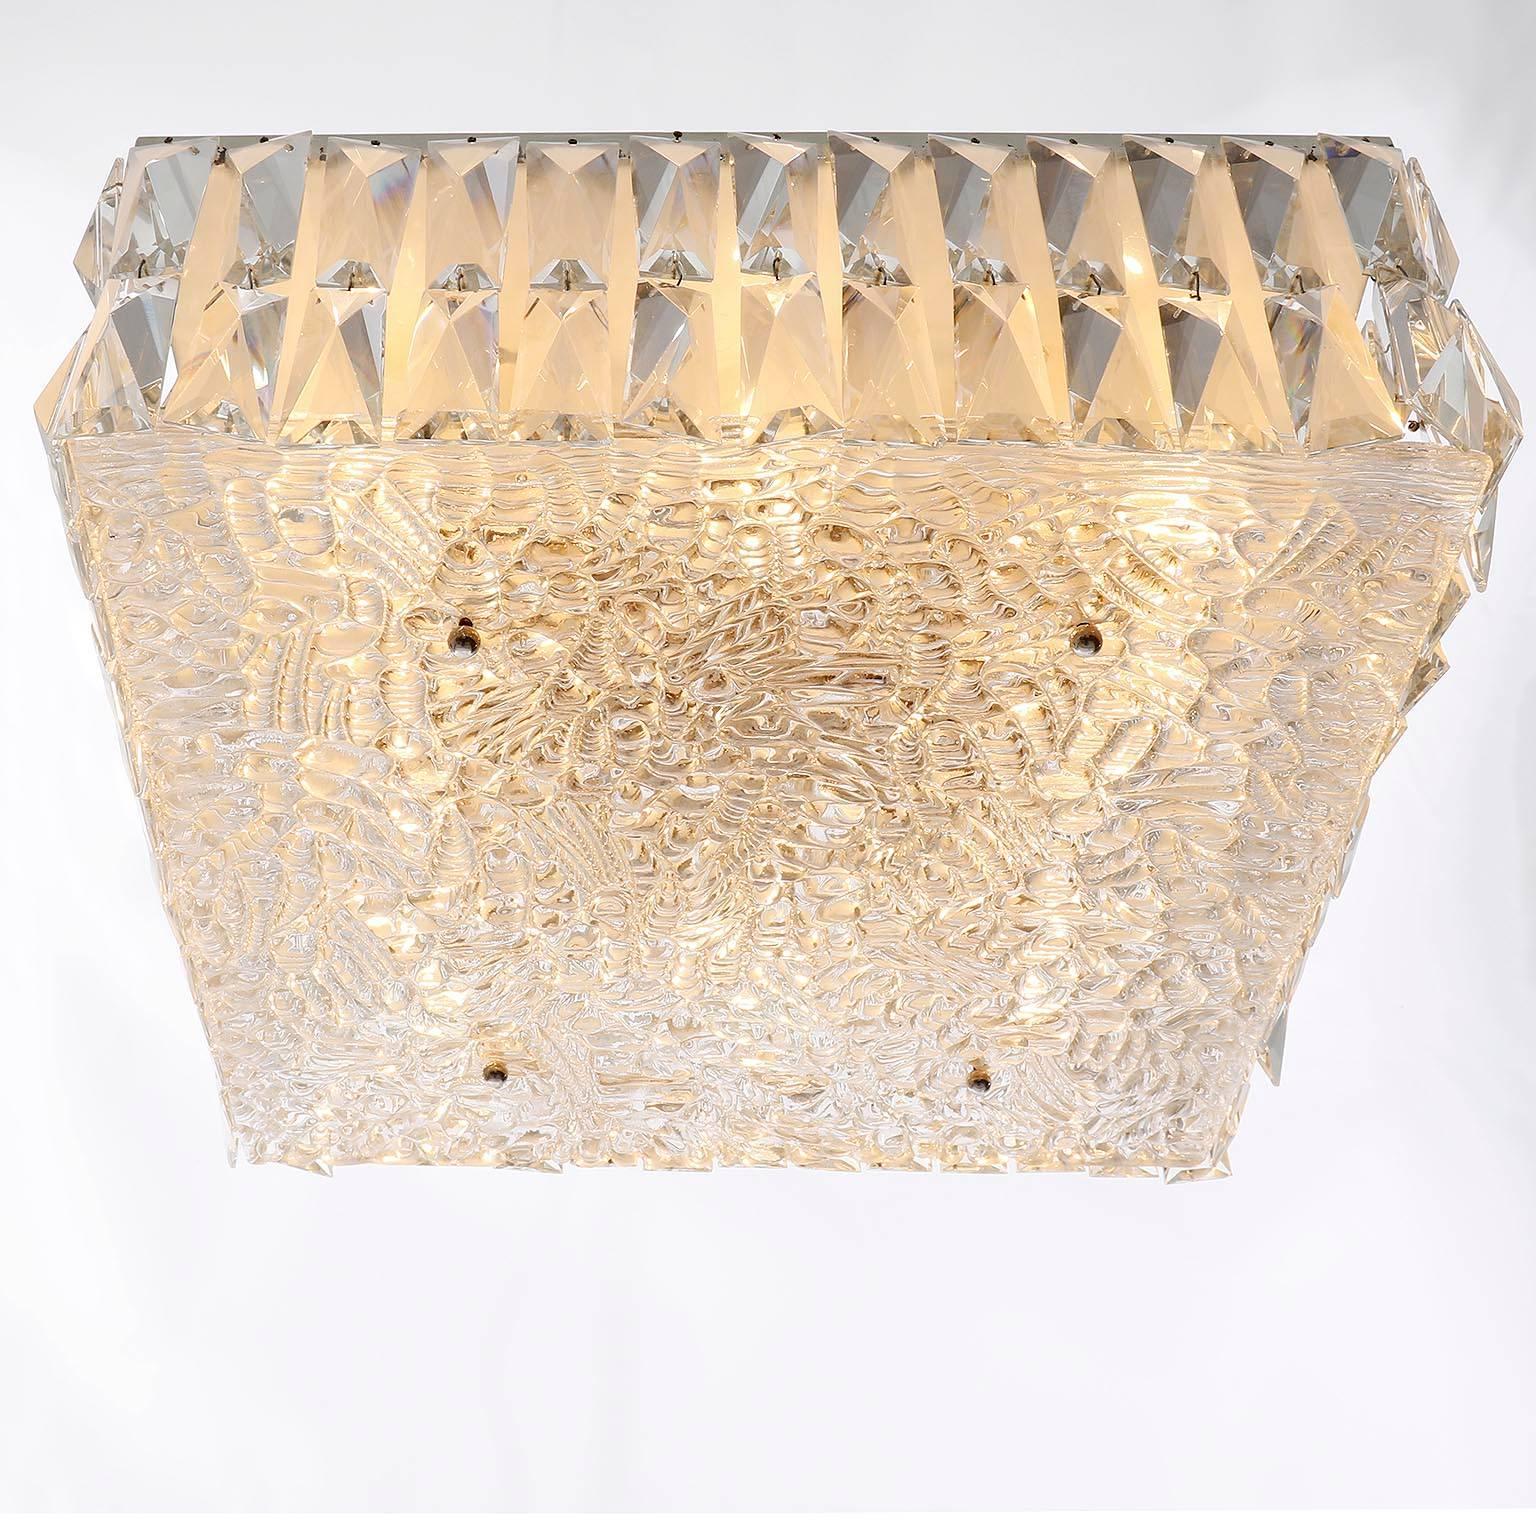 Pressed Square Kalmar Flush Mount Light Fixture, Textured and Crystal Glass, 1960s For Sale